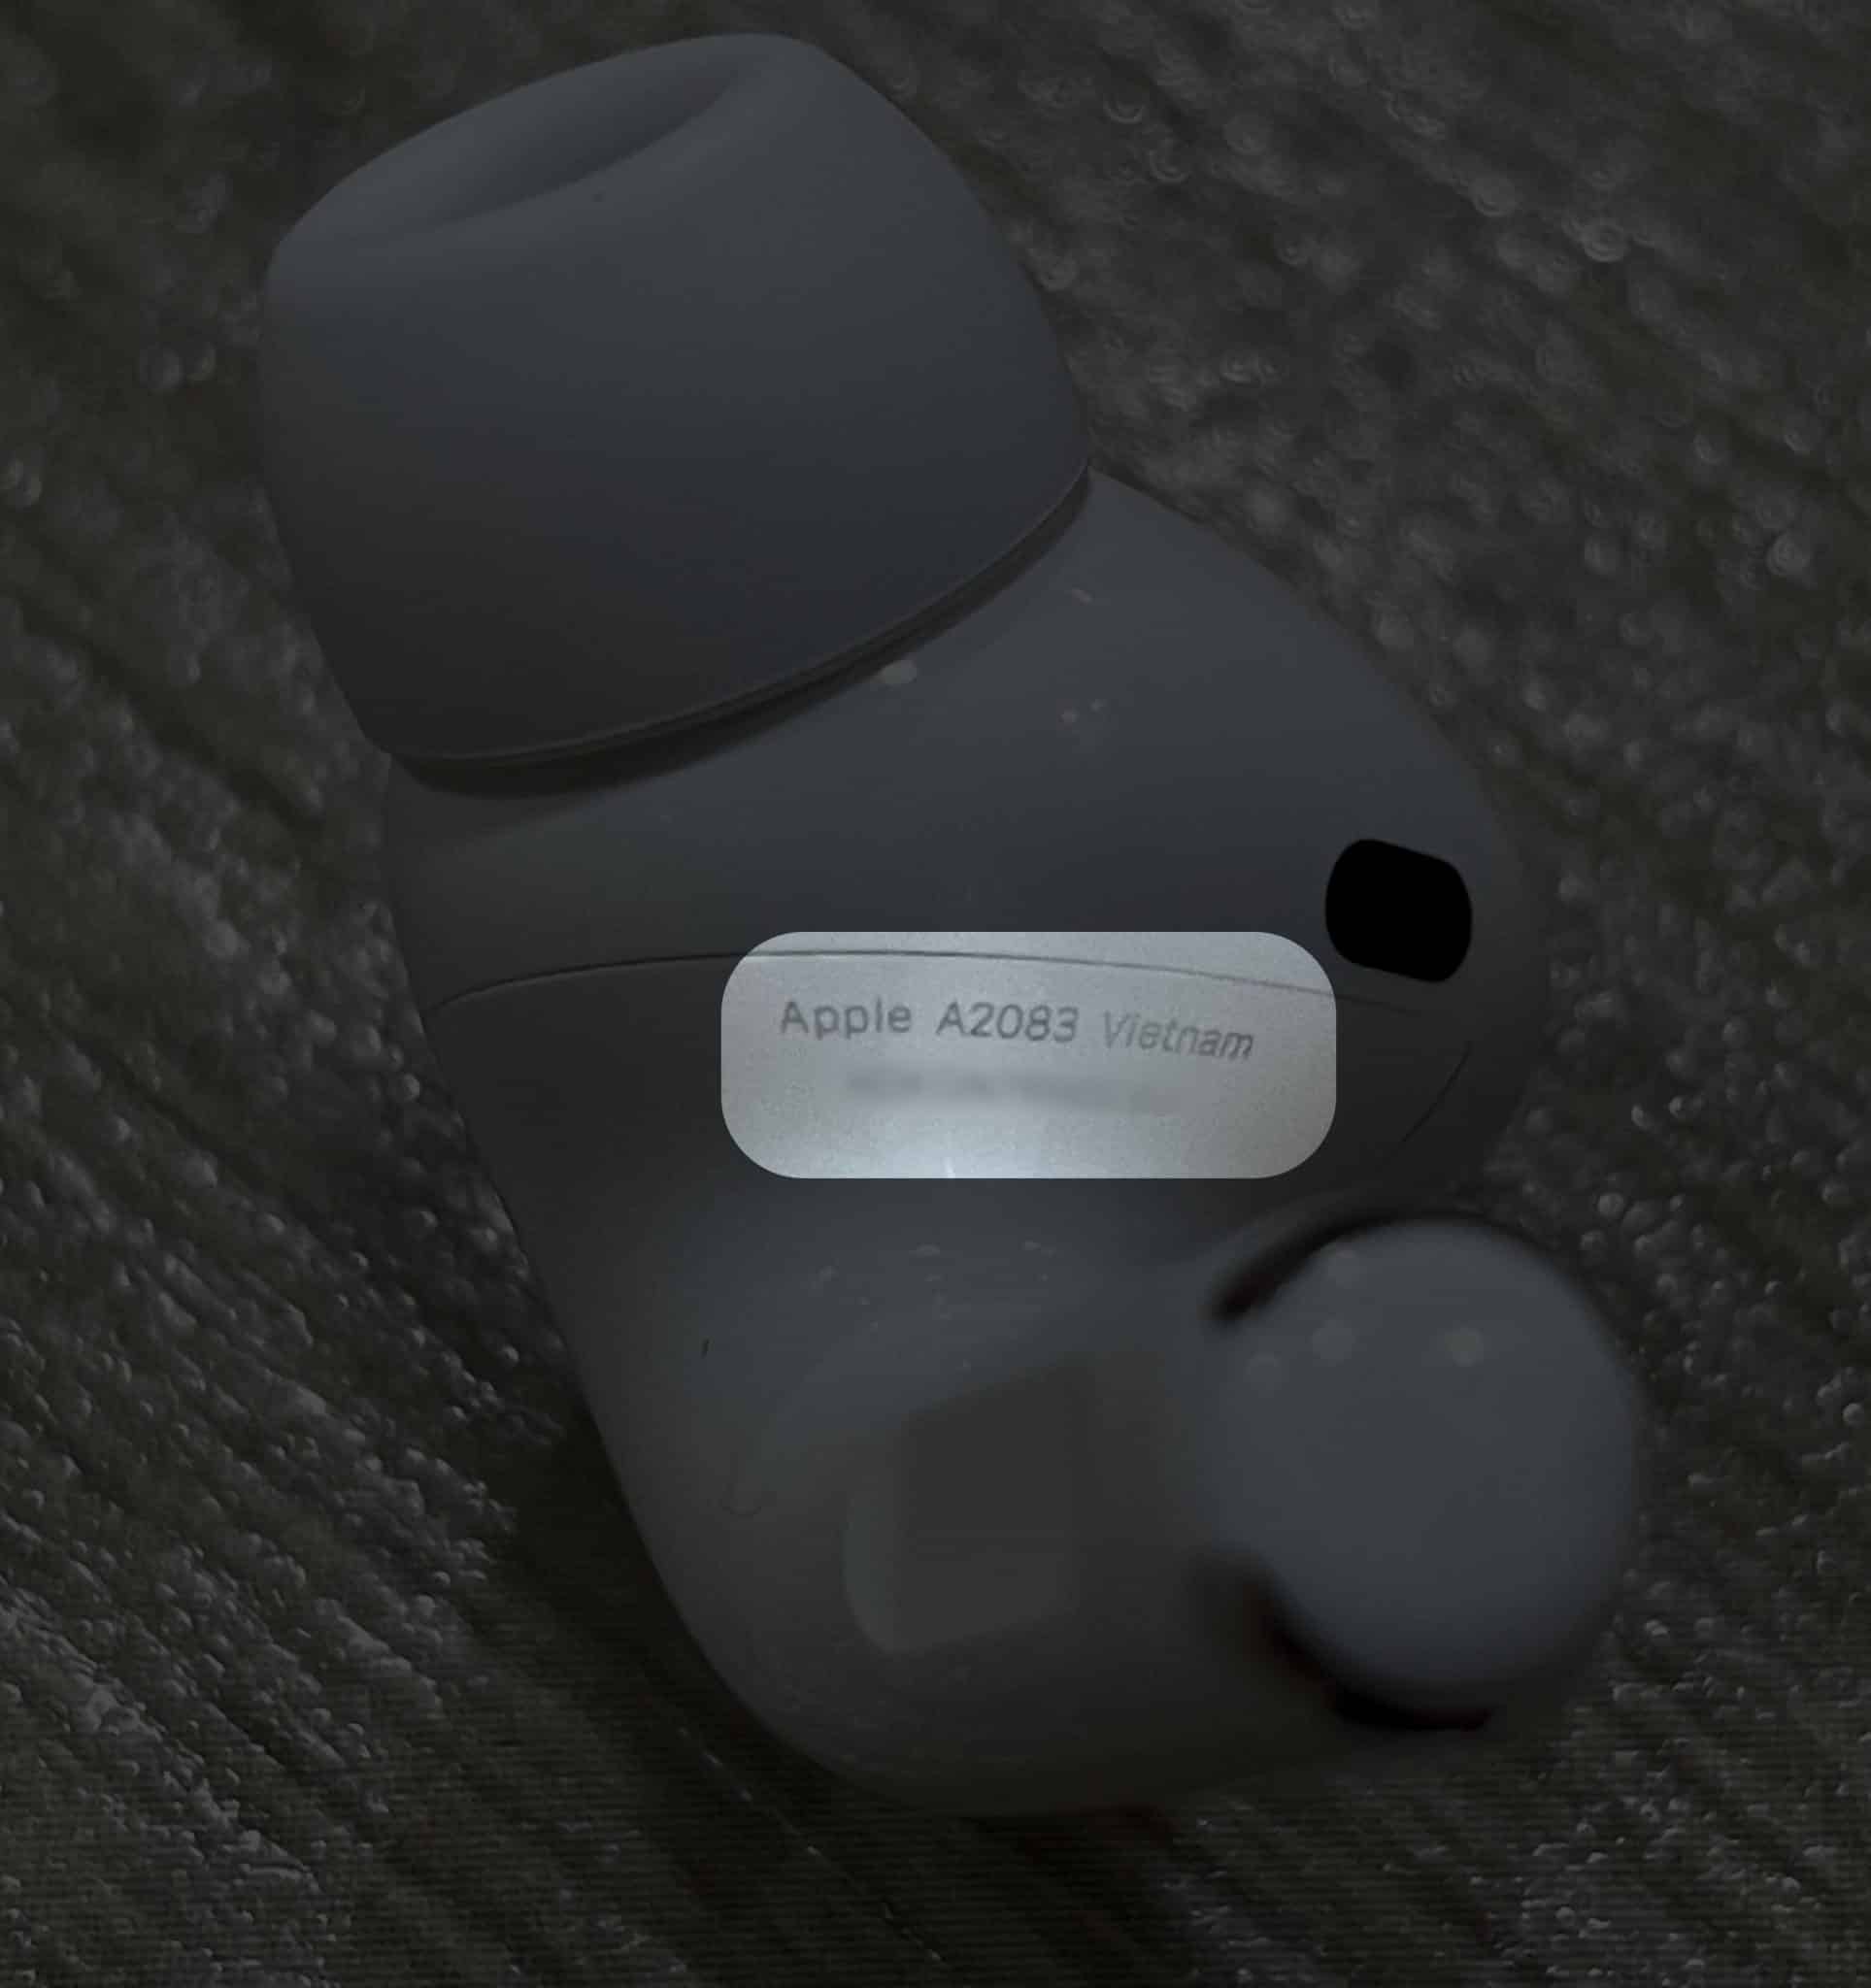 Model Number Printed on an AirPods 